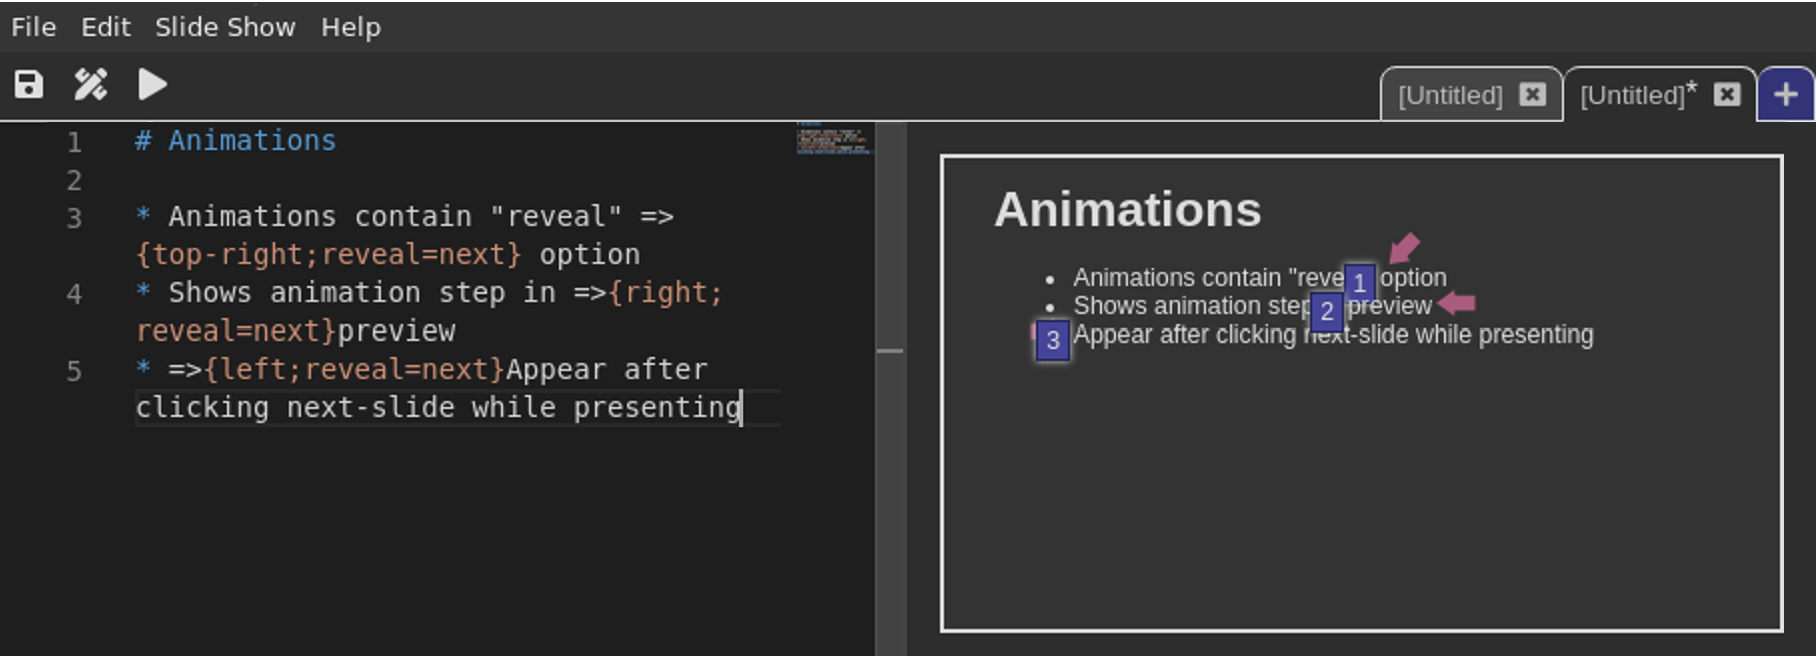 Screen shot showing how to add animations to a slide